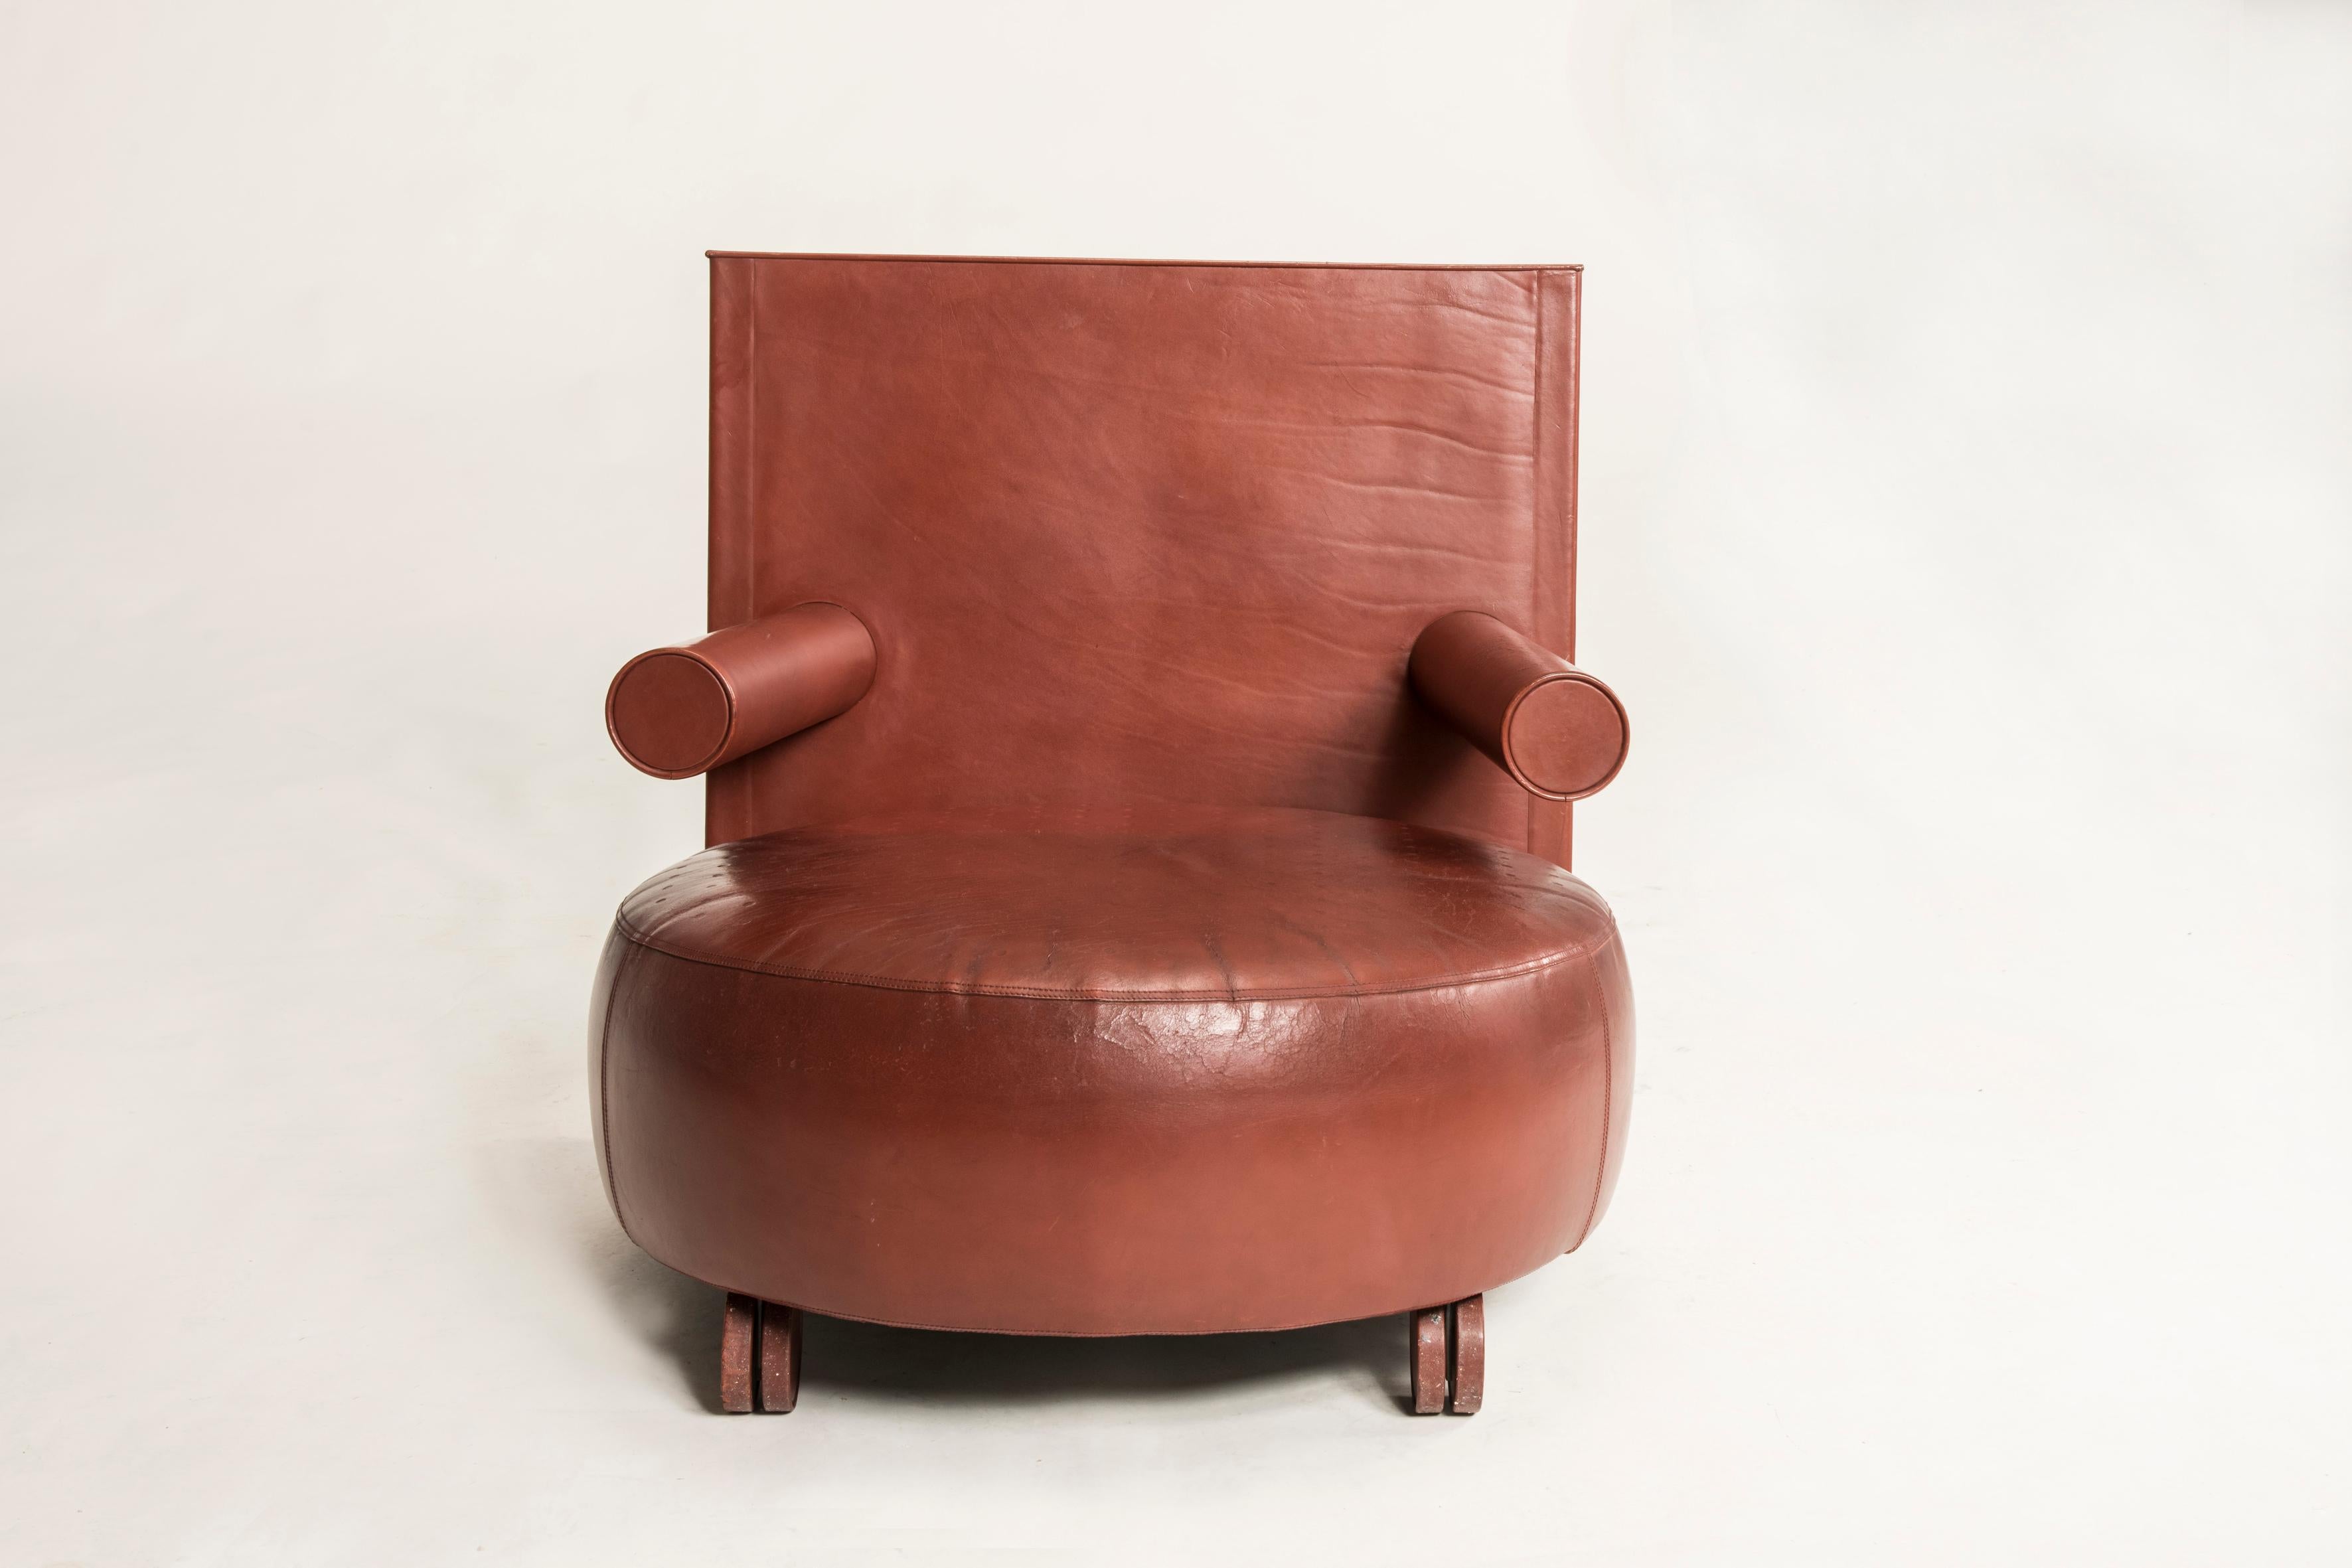 Brown cow leather armchair designed by Antonio Citterio, produced by B&B Italia / C&B Italia, circa 1980s. Rounded Seat and squared backrest make this piece an Iconic piece in Memphis style. Marked and signed, features a paper sticker under the seat